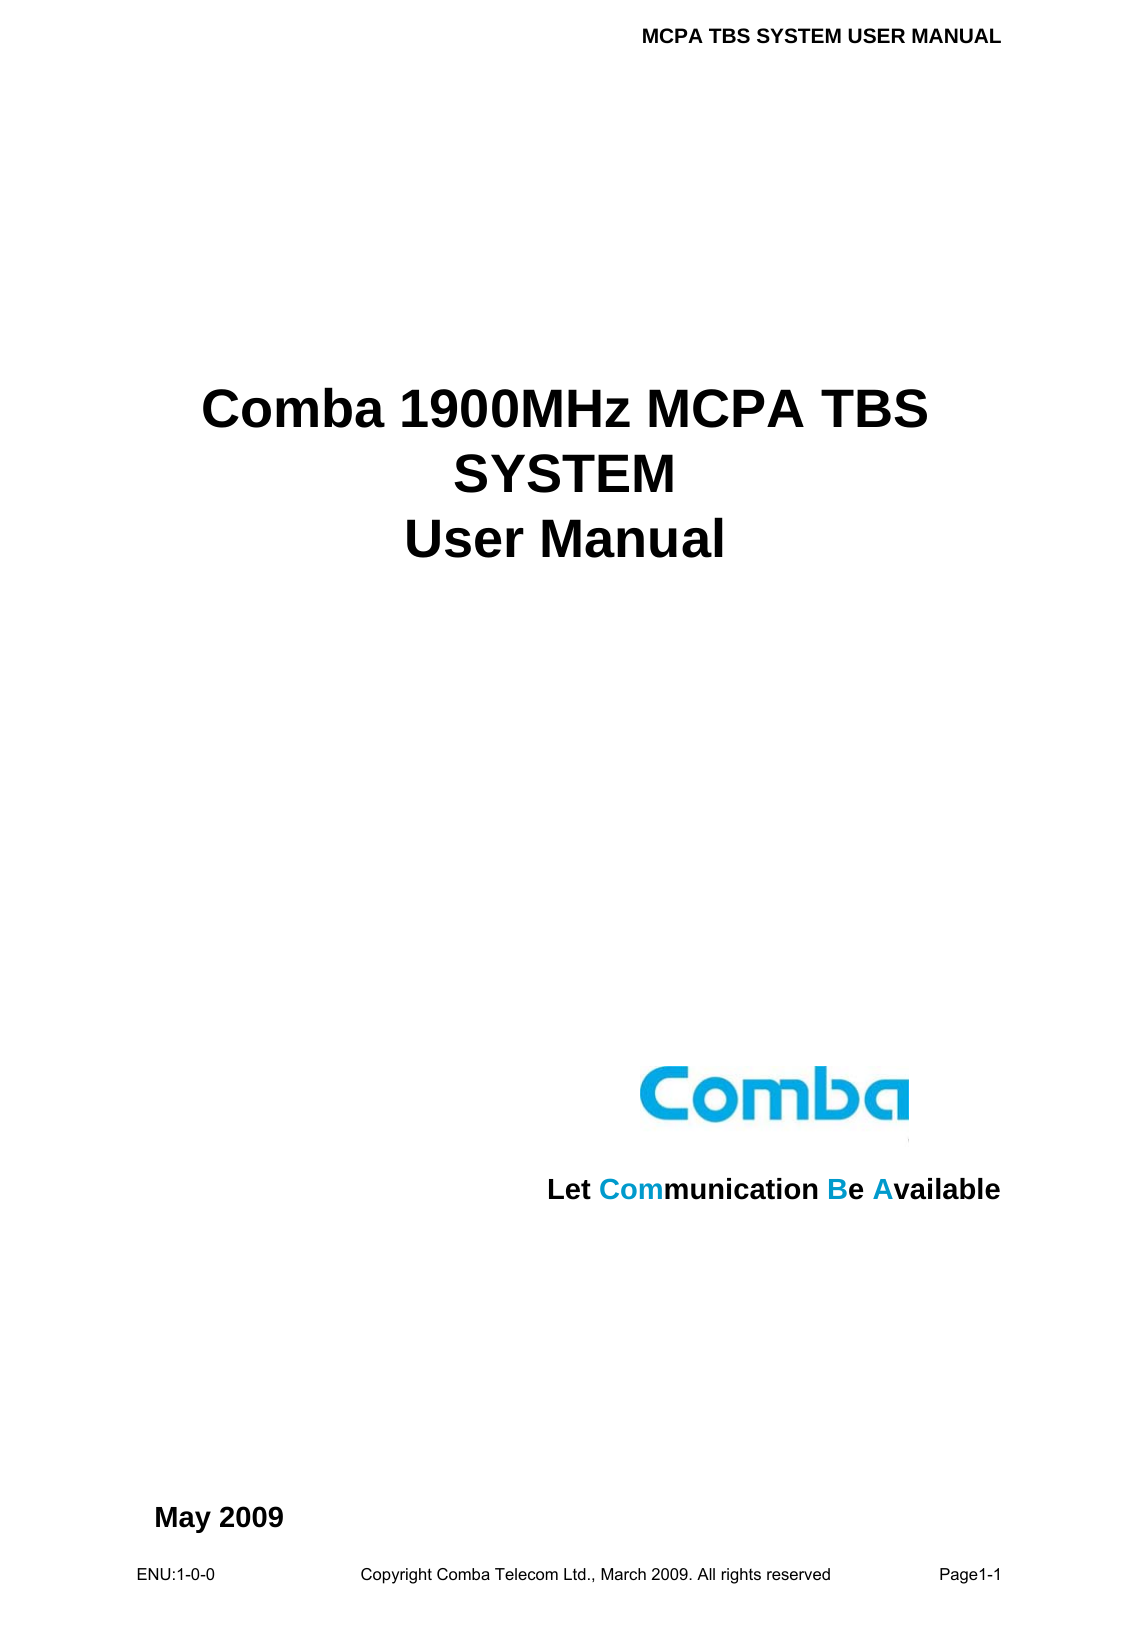 MCPA TBS SYSTEM USER MANUAL ENU:1-0-0 Copyright Comba Telecom Ltd., March 2009. All rights reserved  Page1-1           Comba 1900MHz MCPA TBS SYSTEM User Manual May 2009  Let Communication Be Available 